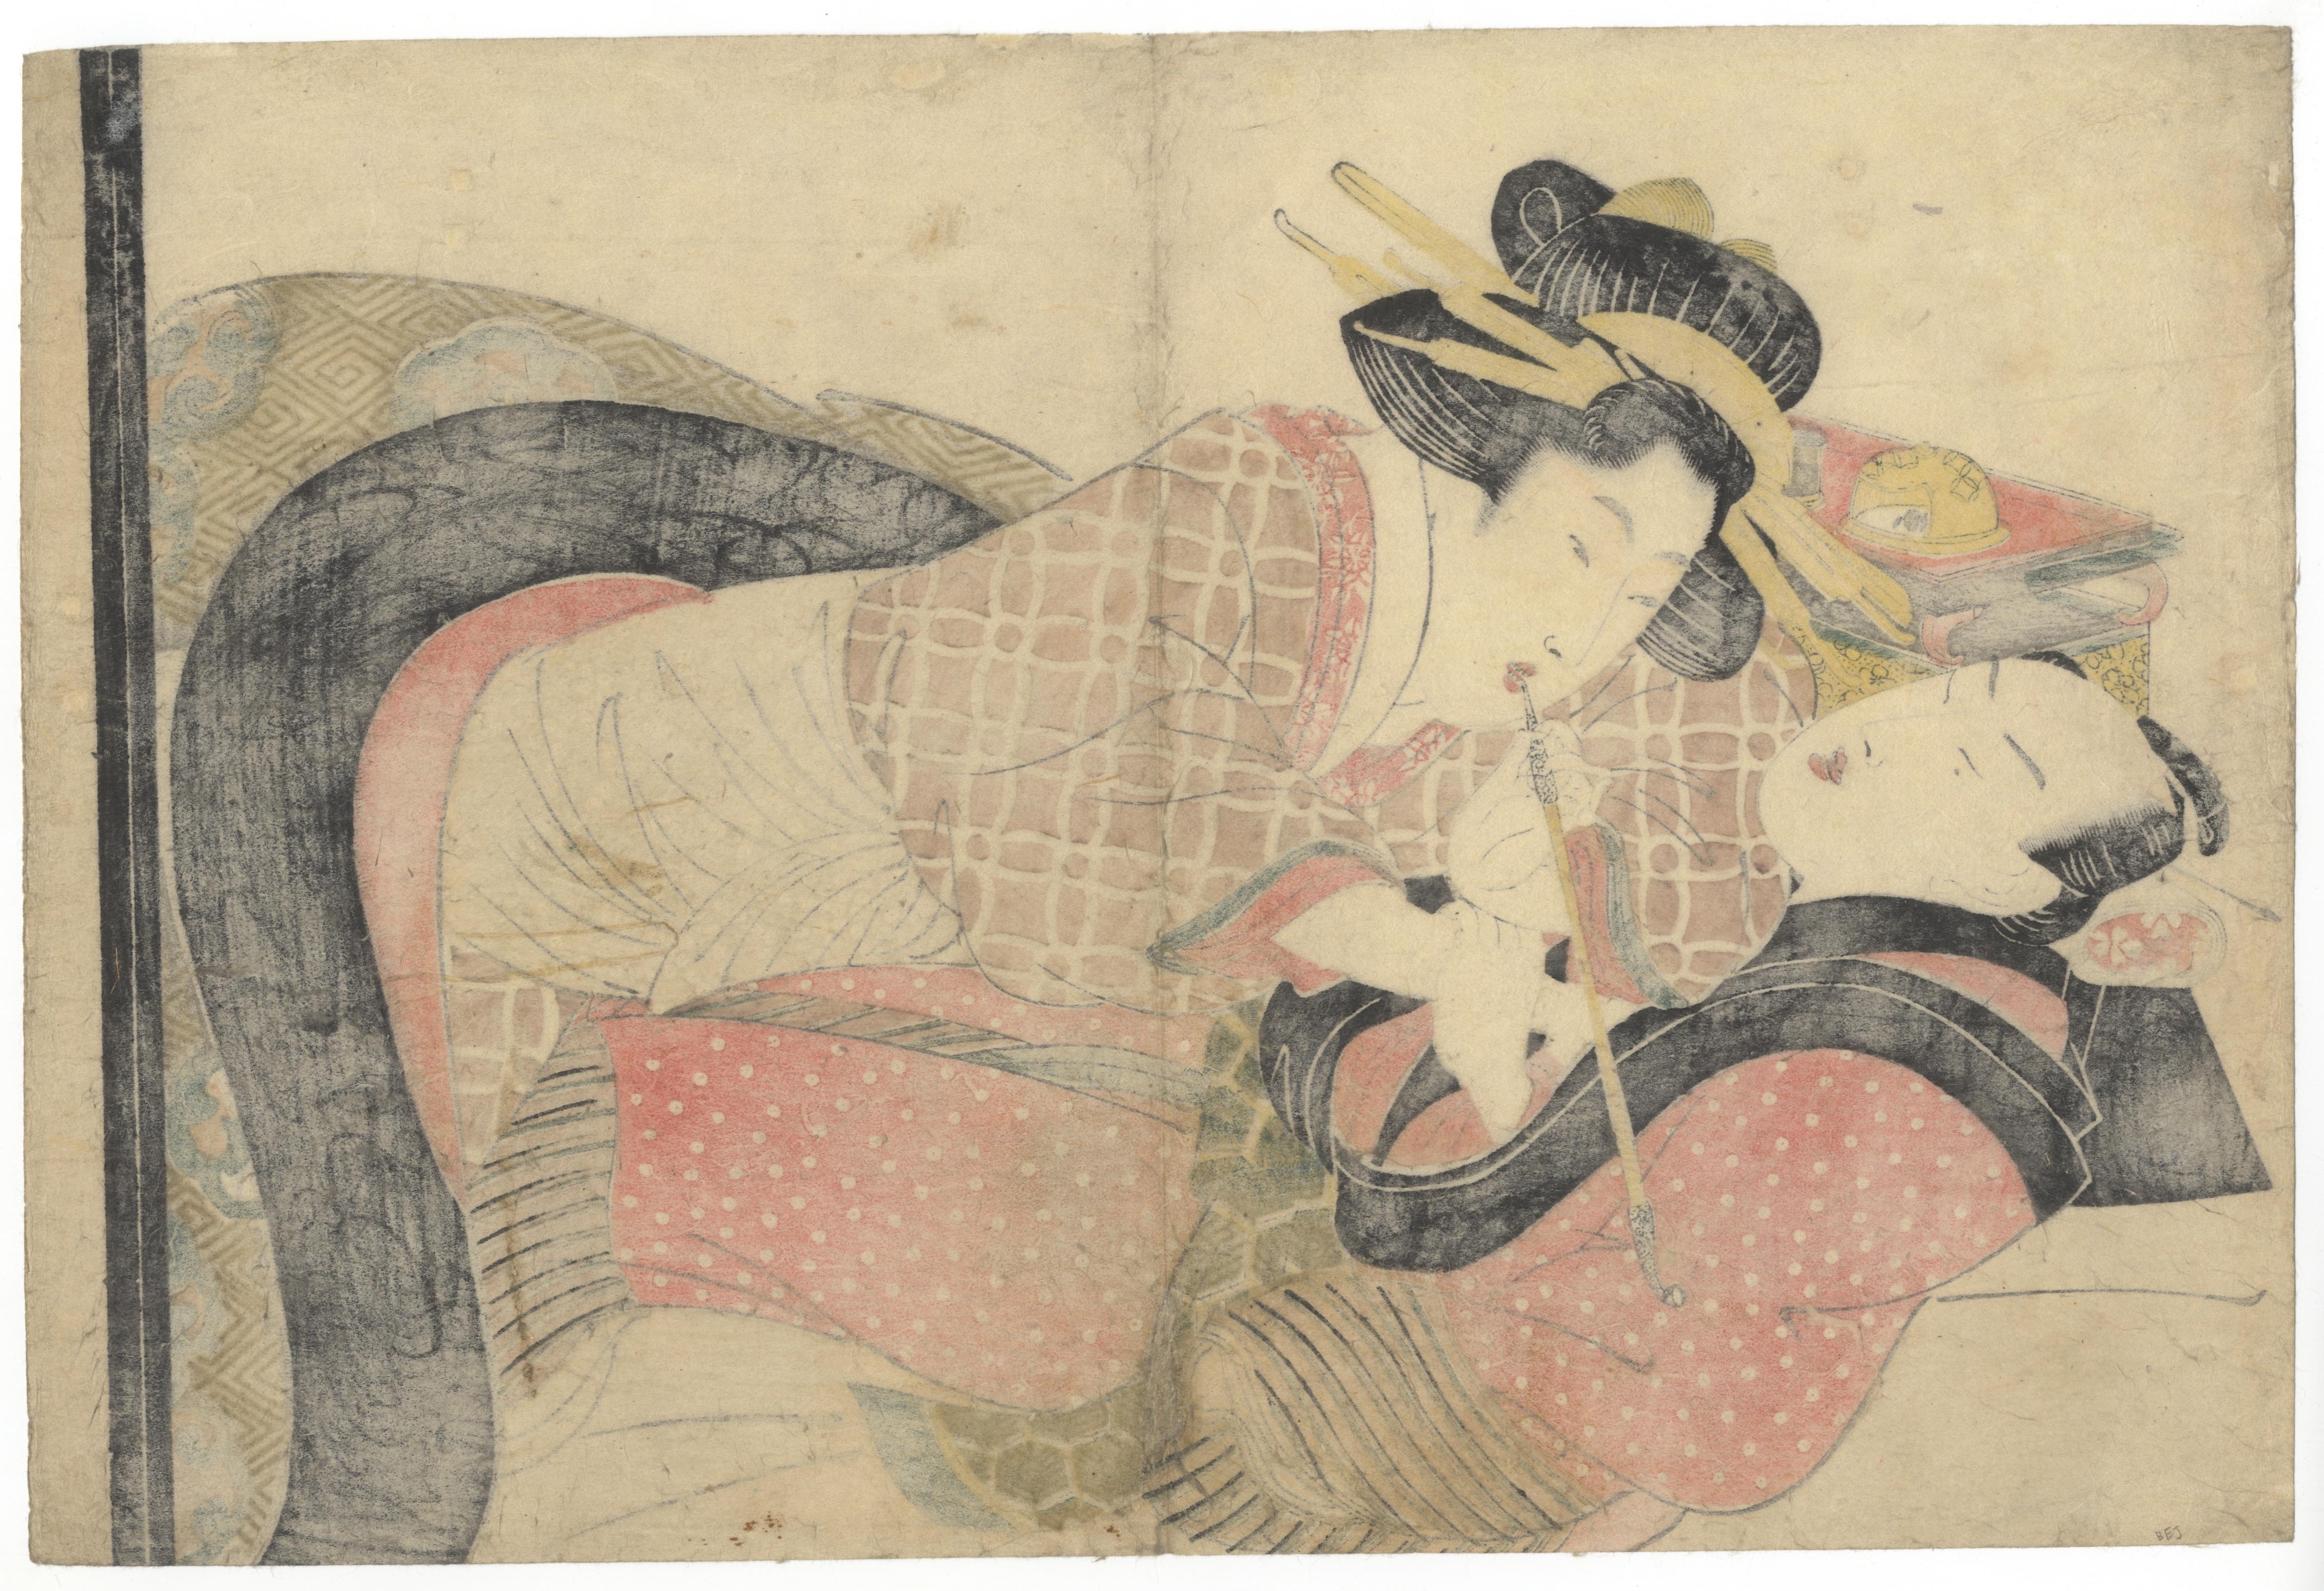 Artist: Eizan Kikugawa (1787-1867)
Title: Abuna-e, Smoking 
Date: c. 1800s -1830s
Dimensions: 38.6 x 26 cm
Condition: Centrefold. Some restored wormholes. Faint stain on the centre right. Light soiling. 

Abuna-e refers to suggestive and sensual